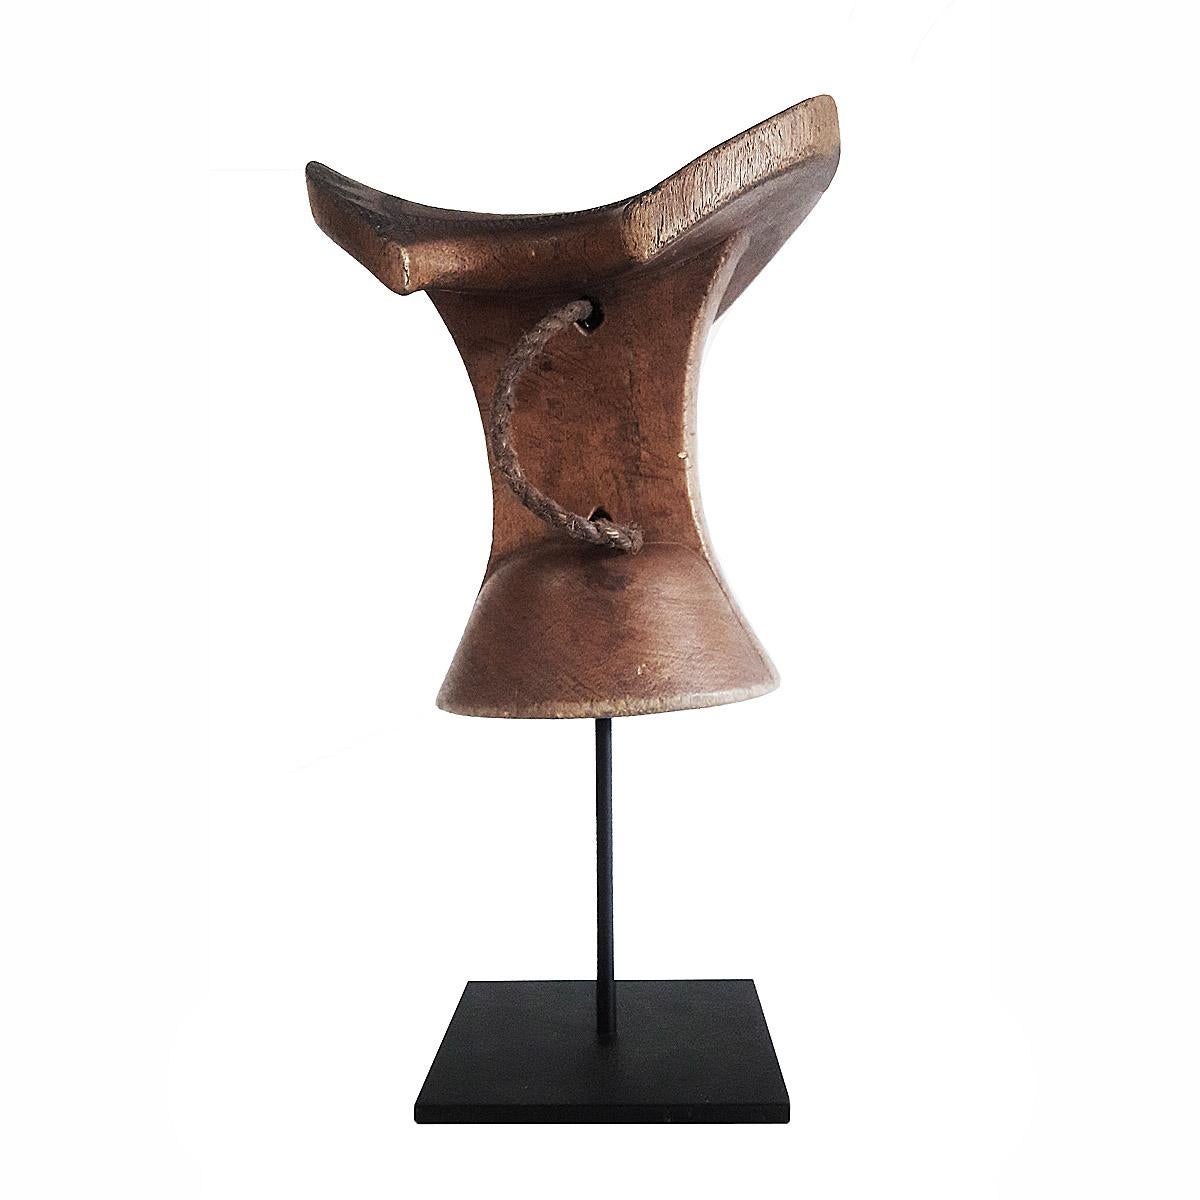 A headrest or stool, hand carved out of a single piece of teak wood, and decorated with traditional carvings, with a braided leather handle. Ethiopia, late 20th century. Mounted on a black metal stand.